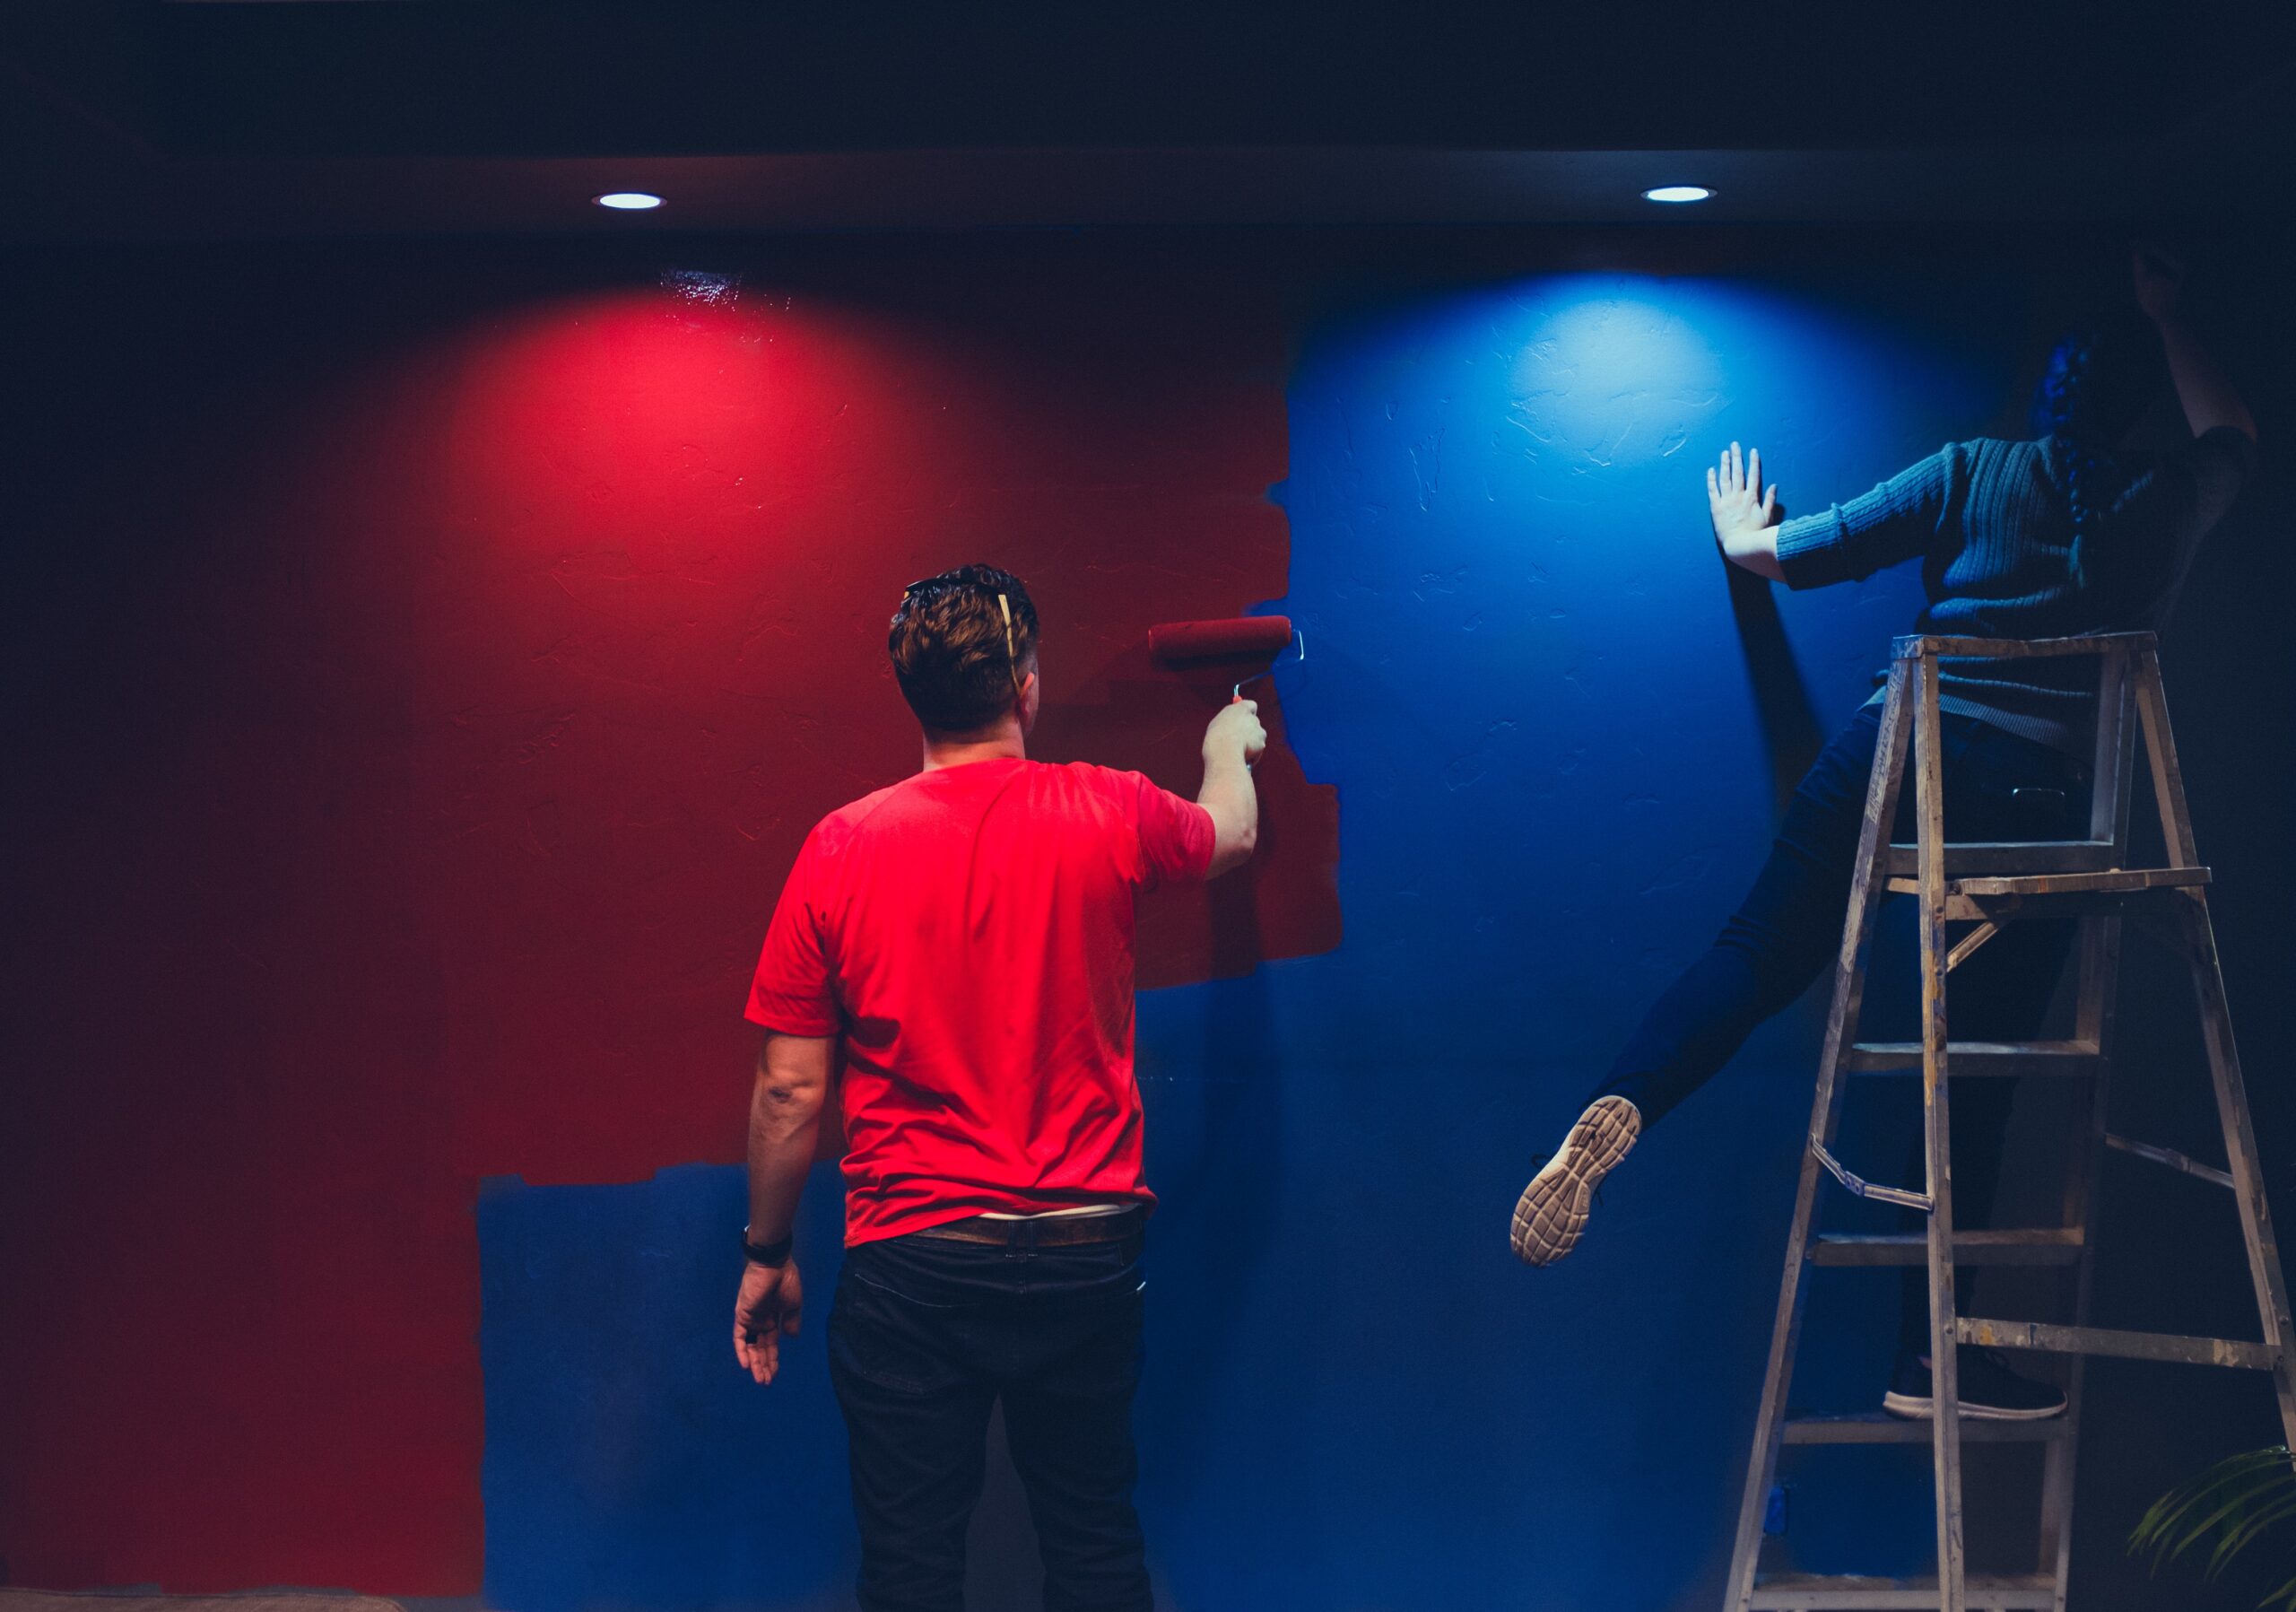 A man and a woman painting a wall red and blue